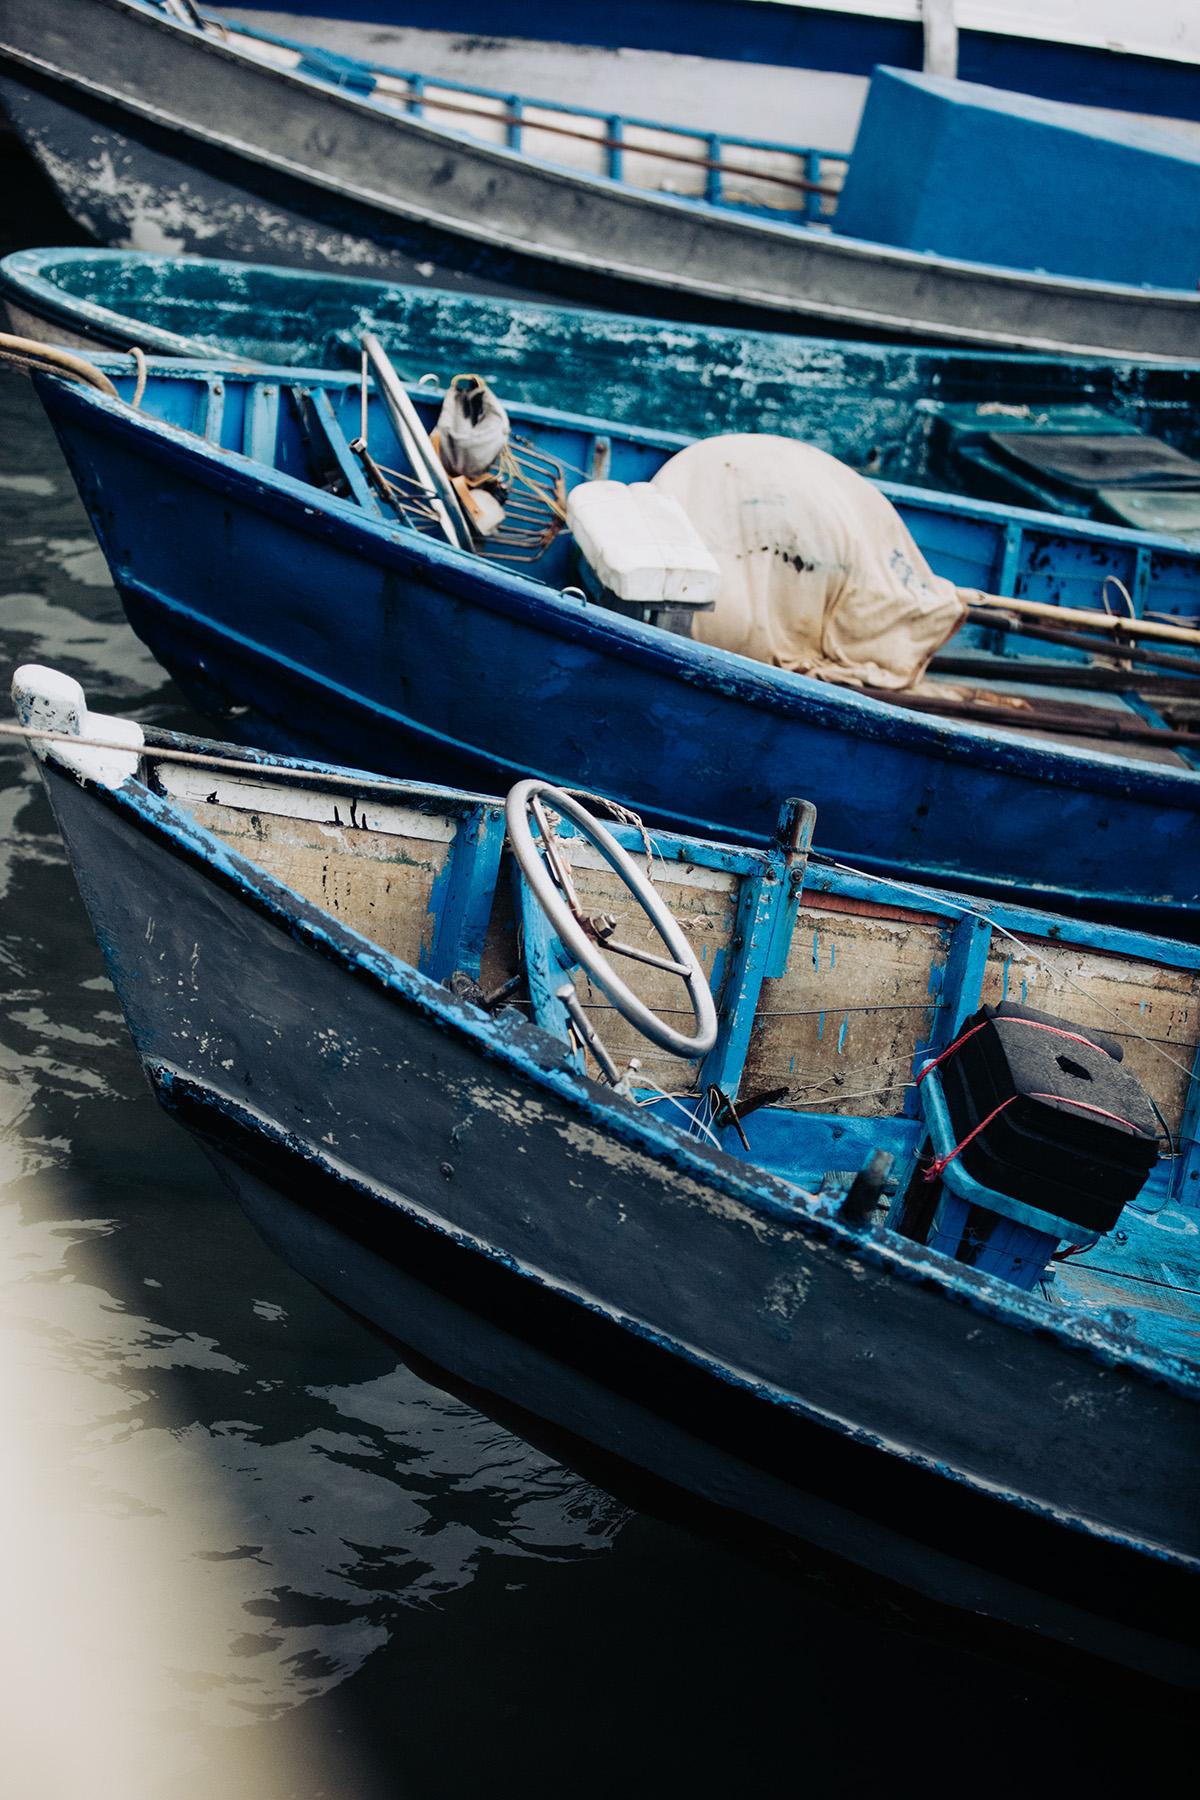 Boat photography, "Sapphire Seas" 

WISDOM I LEARNED:
"One of the interesting facts I learned from this particular manufacturing experience was that in the Vietnam culture, red means prosperity.“ - Addison

This was from a advertising trip to